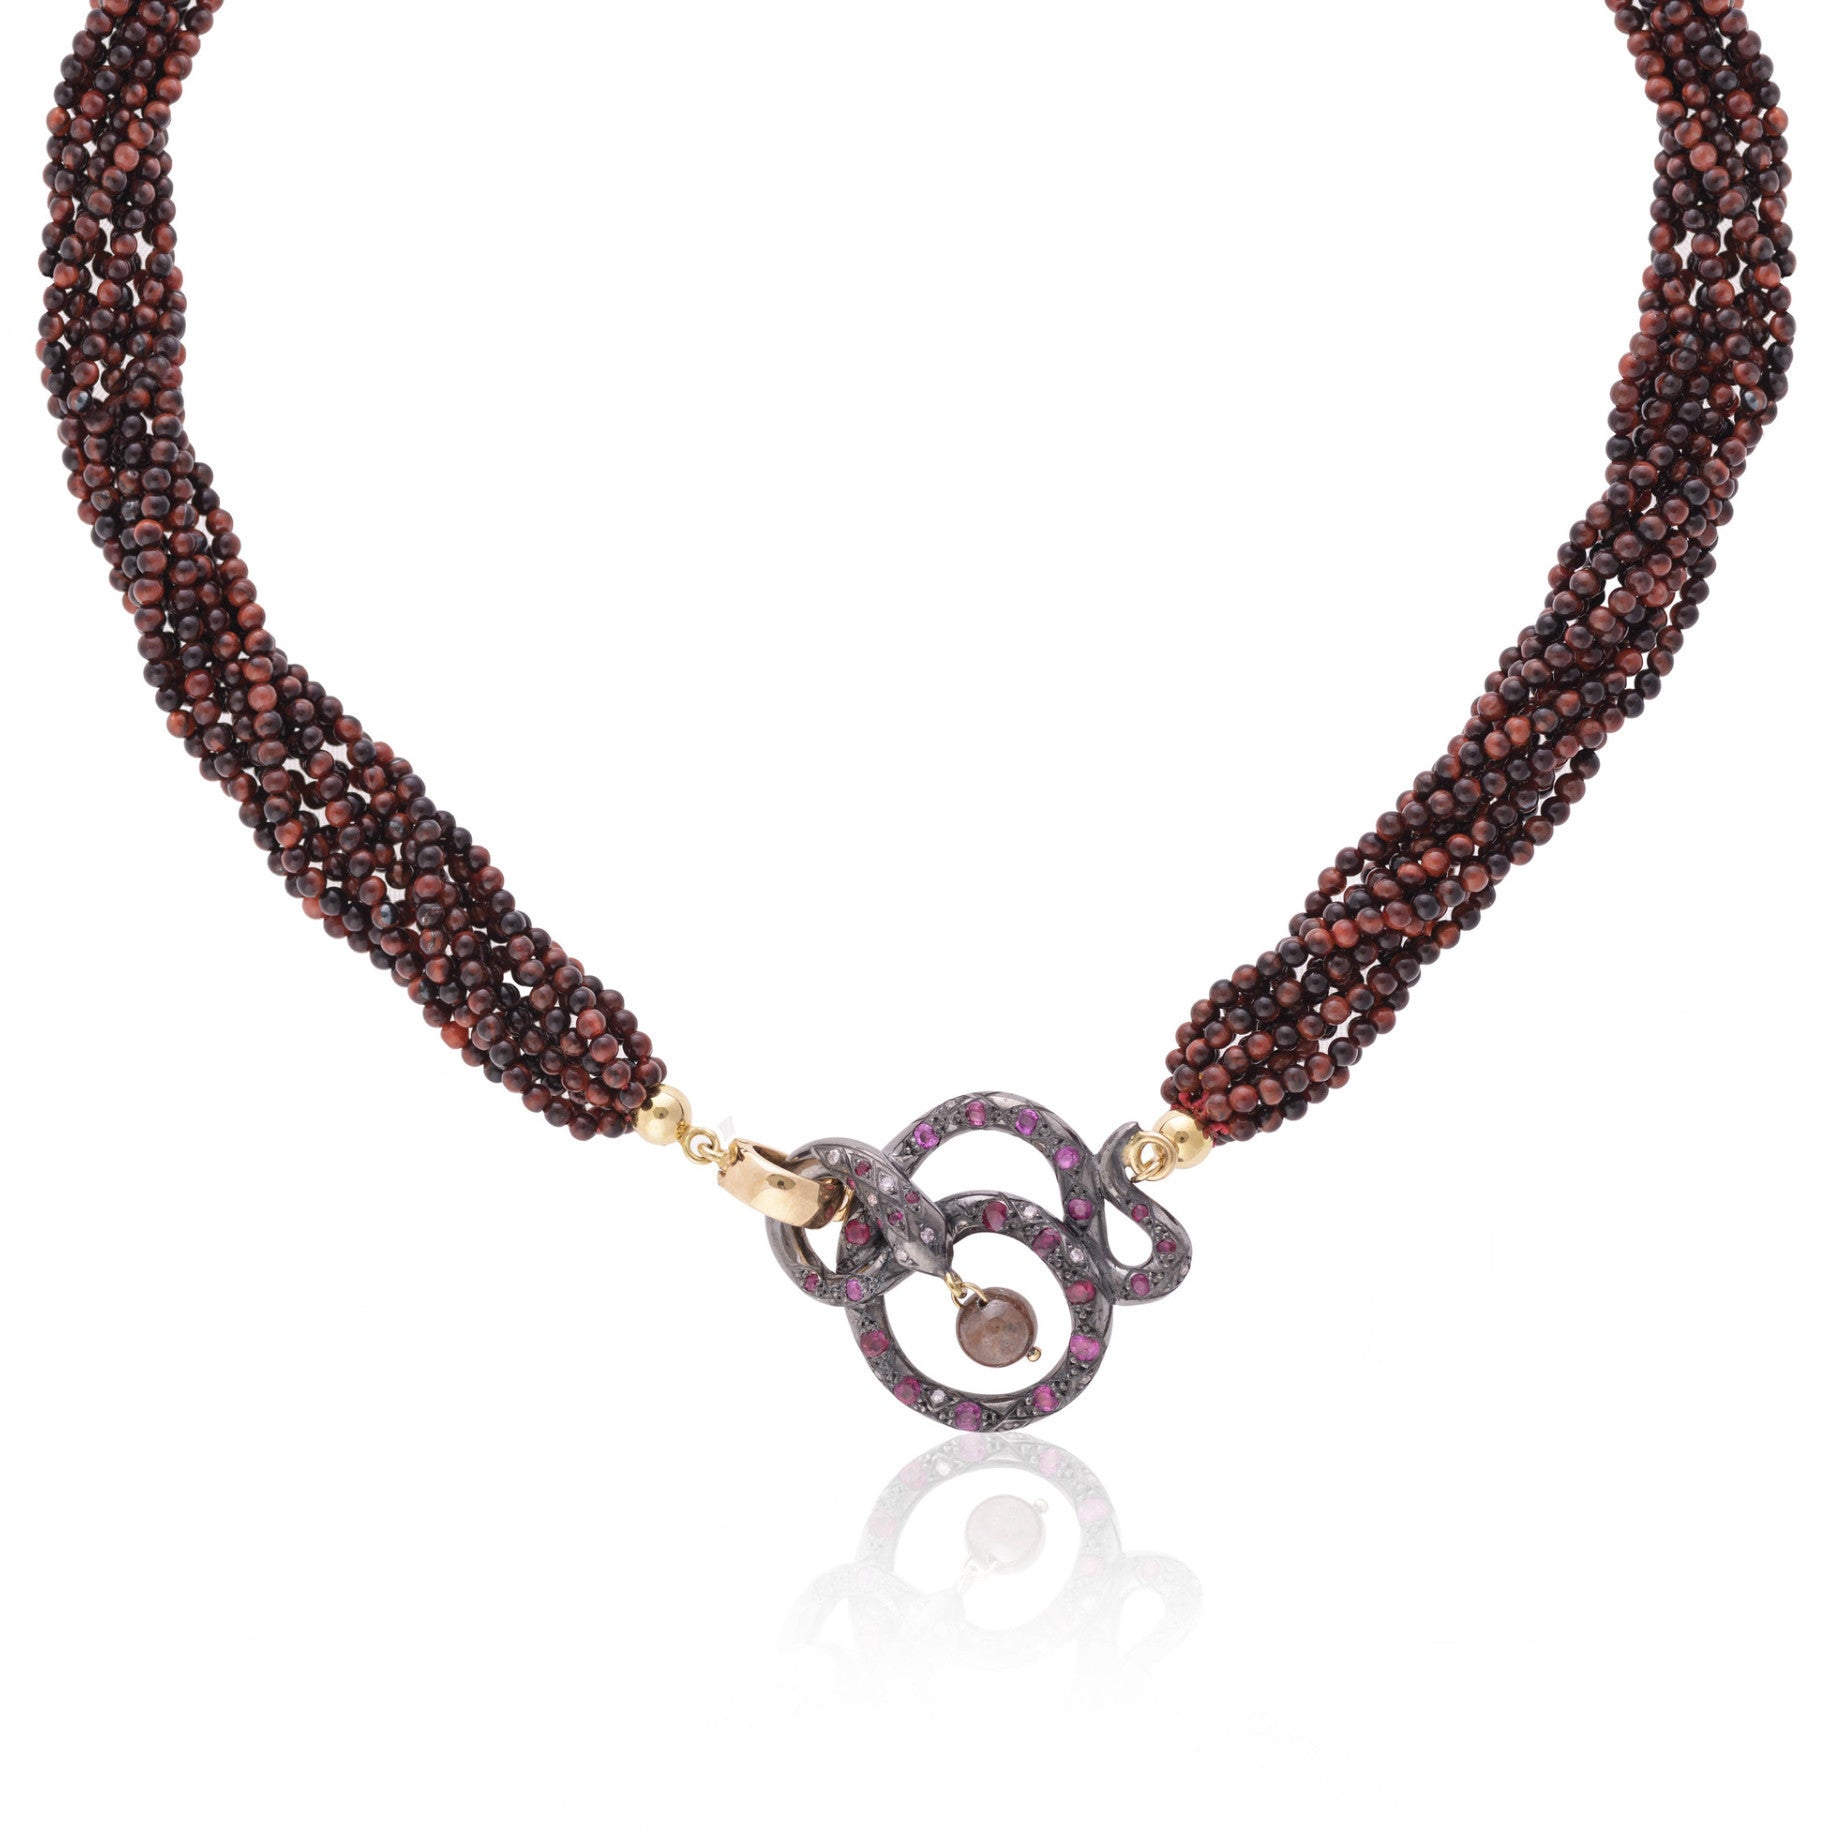 Black Snake & Red Tiger Eye Necklace with diamonds and rubies by McFarlane Fine Jewellery